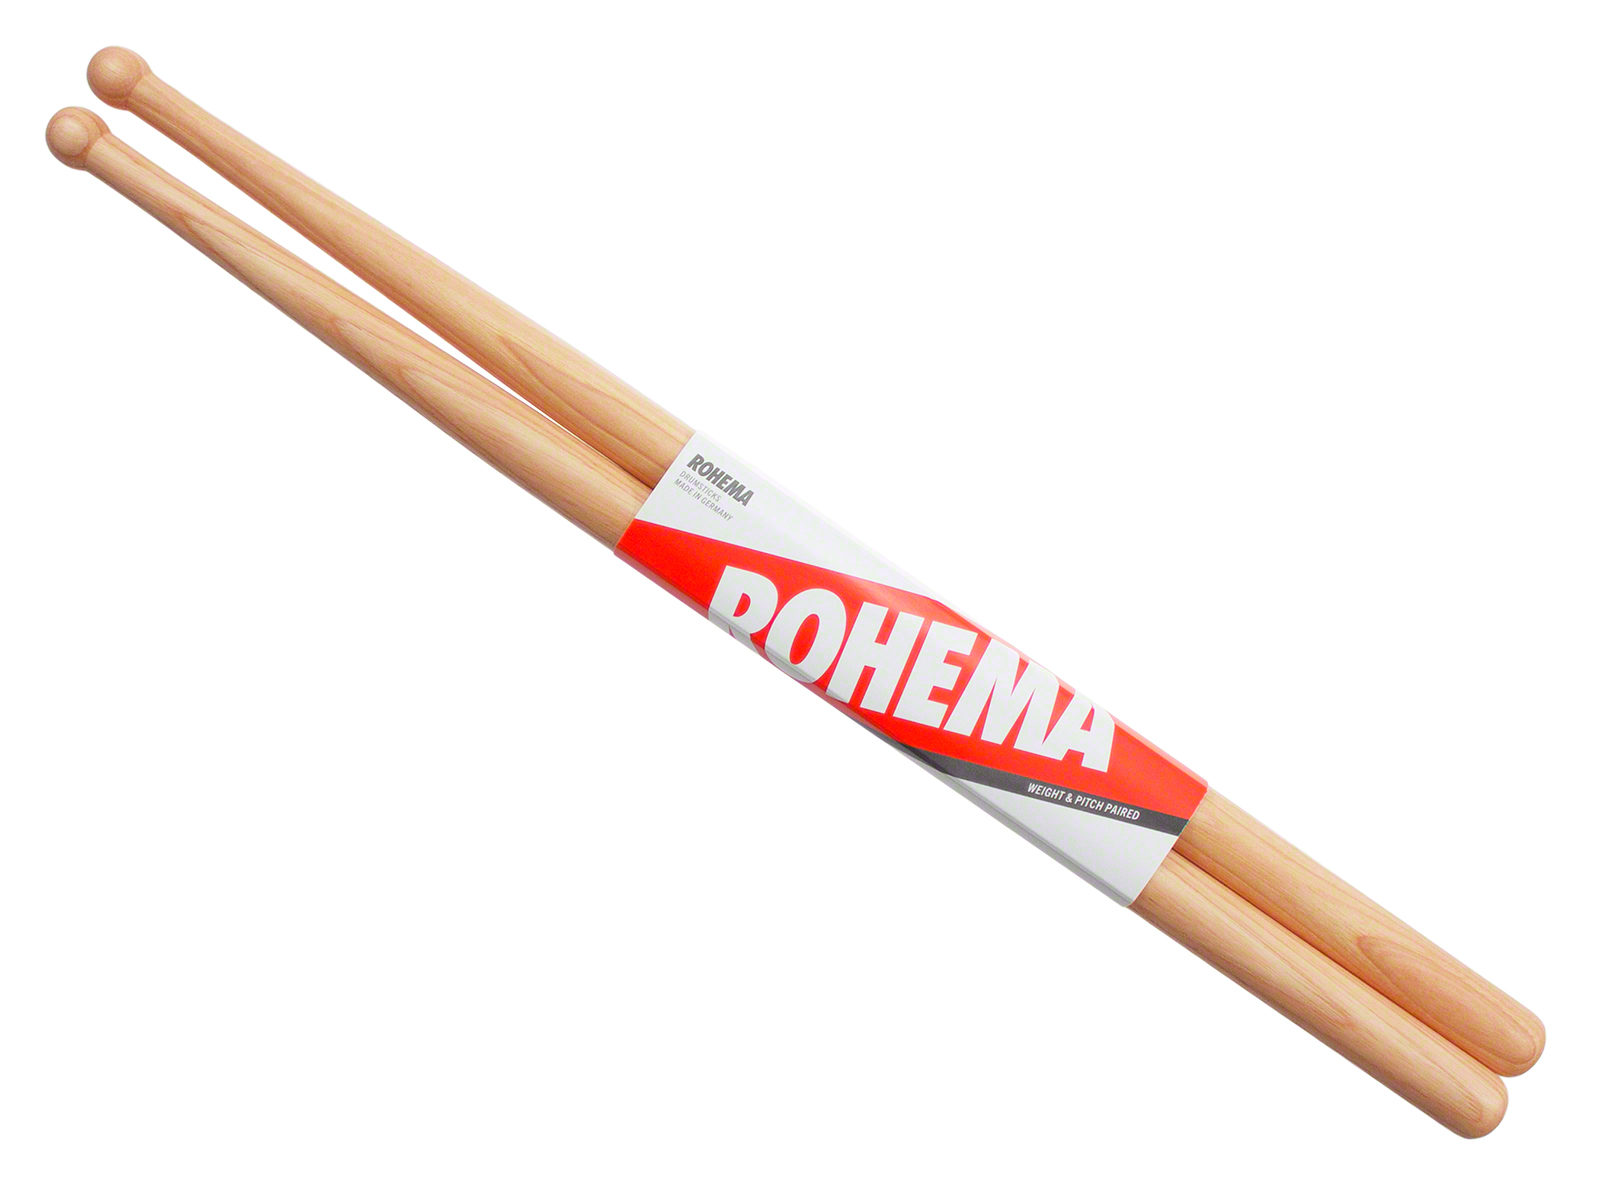 ROHEMA RM2 HICKORY MARCHING SERIES